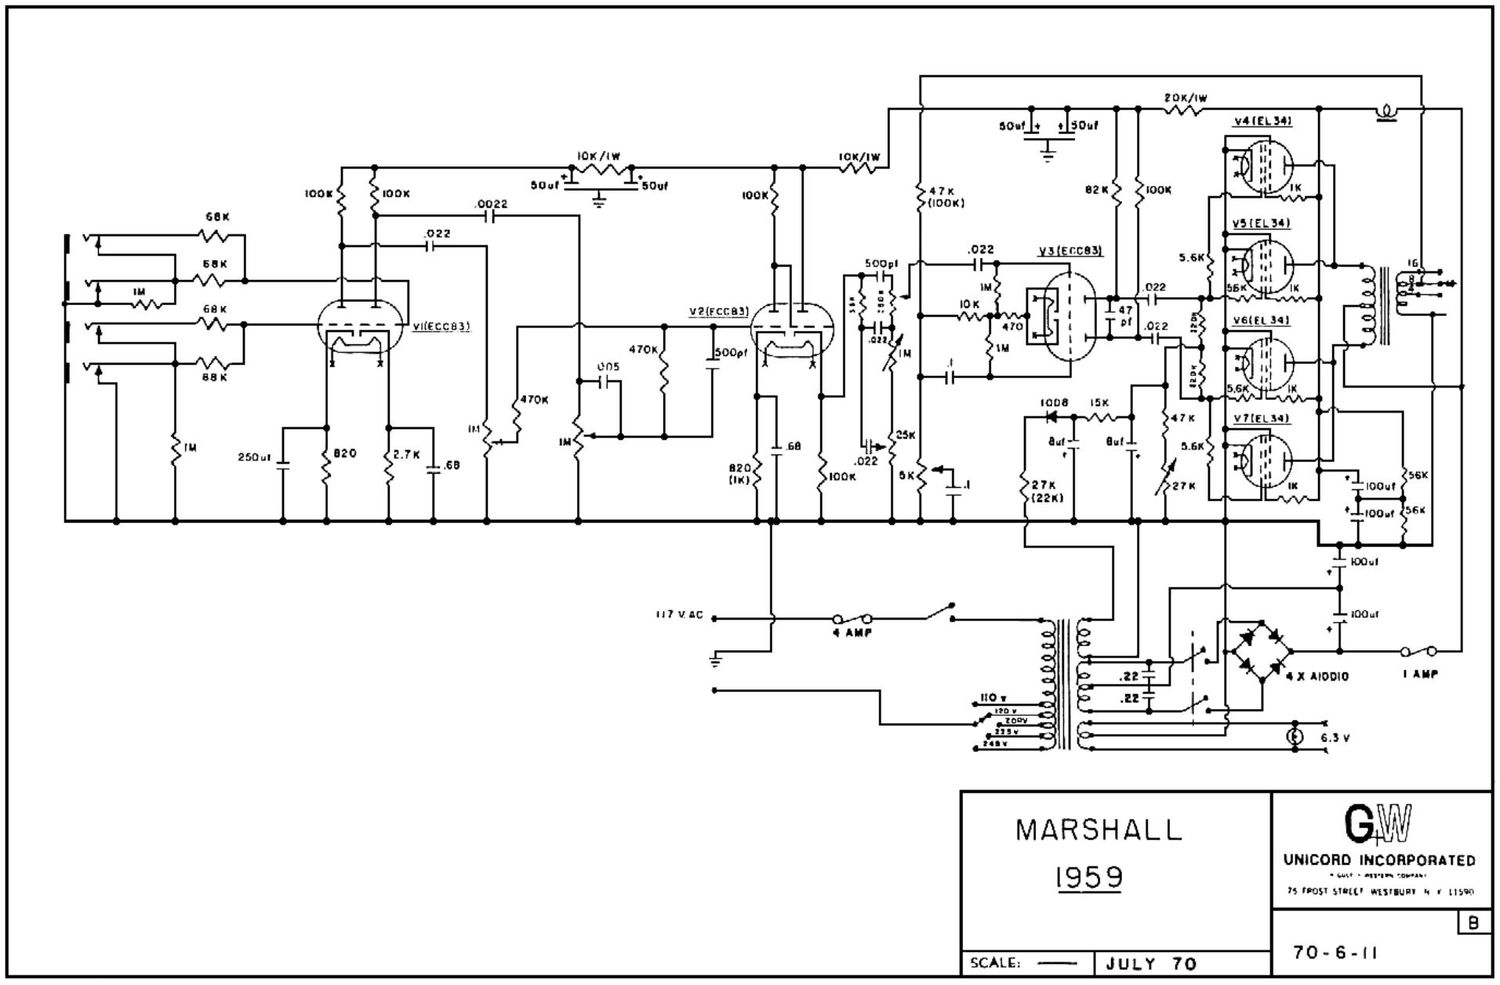 Free Audio Service Manuals Free Download Marshall 1959 Schematic